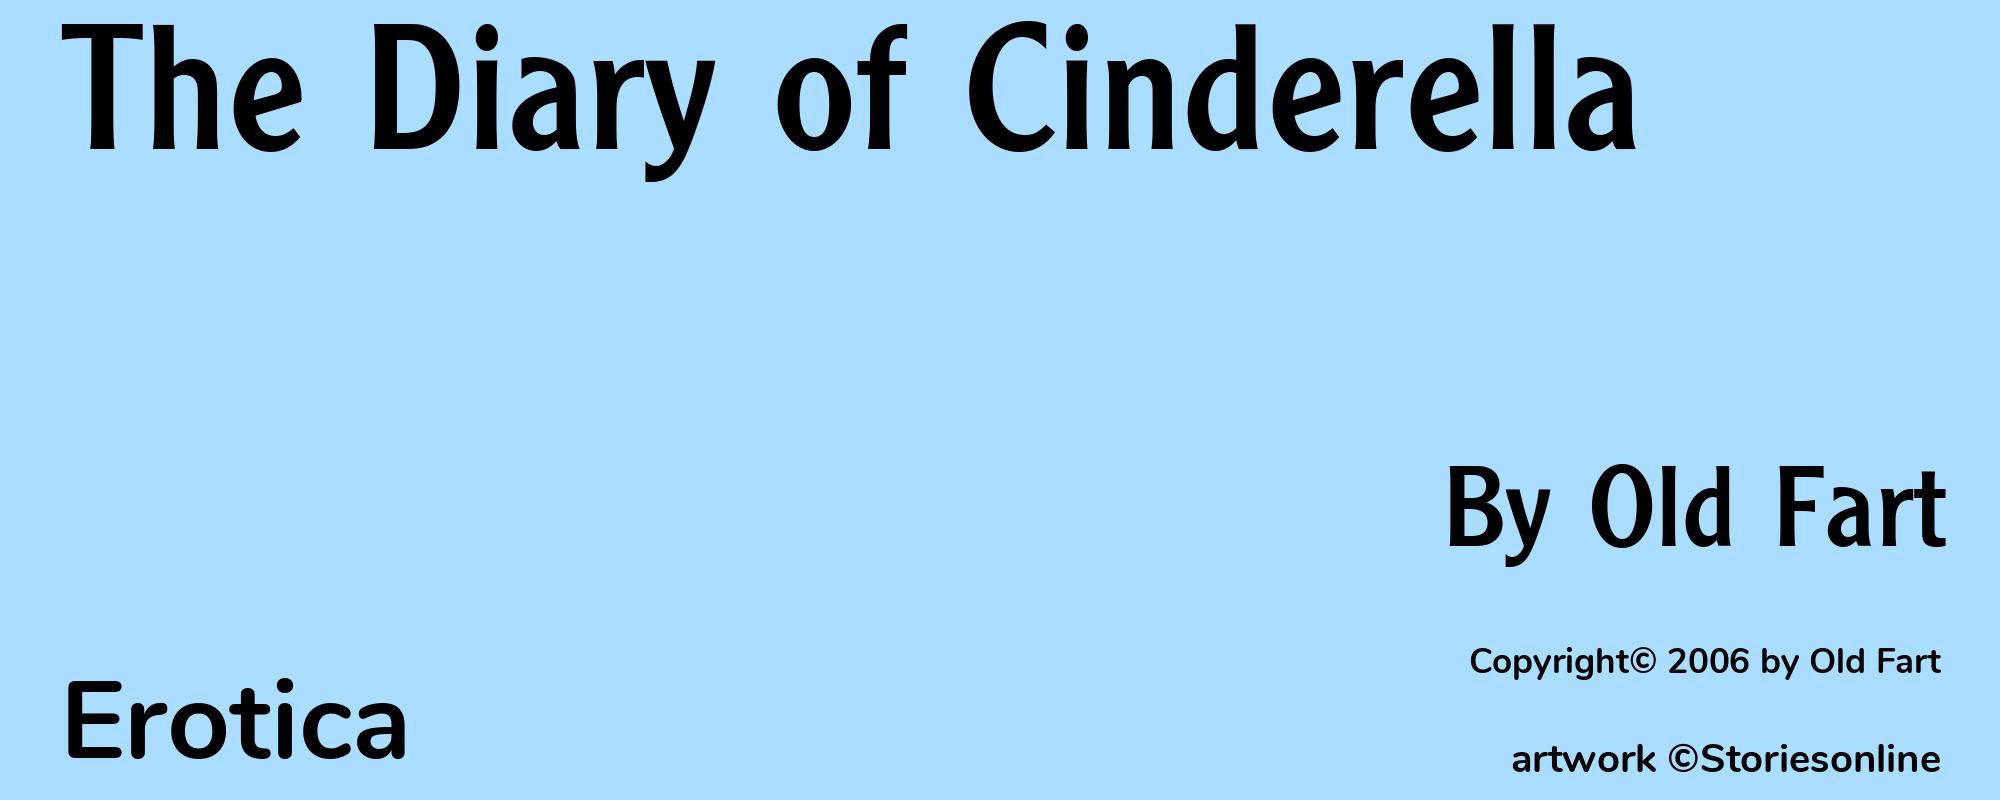 The Diary of Cinderella - Cover